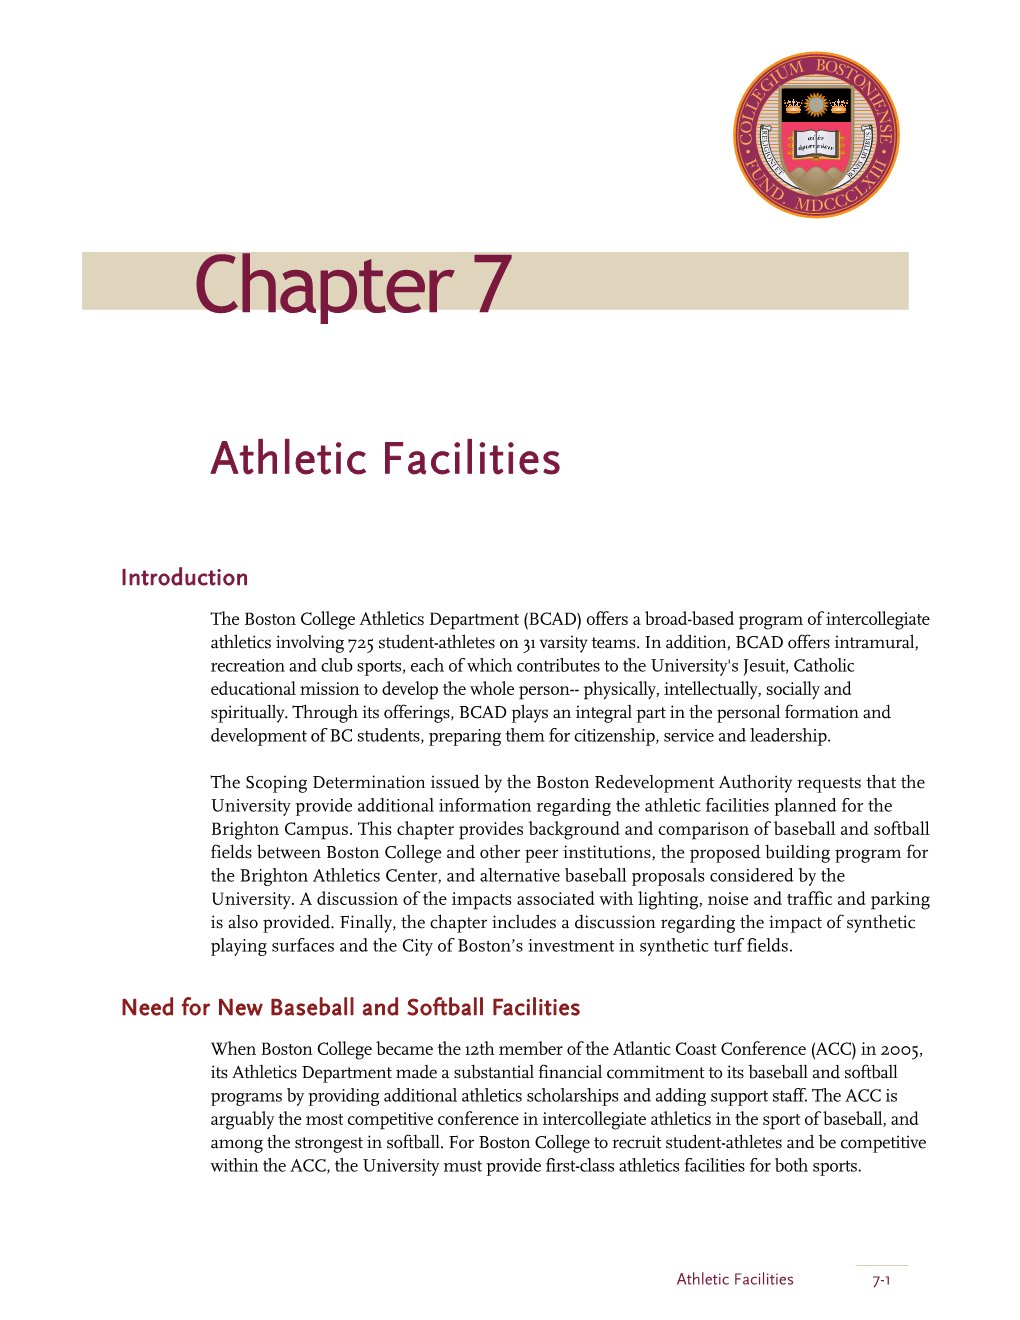 Chapter 7: Athletic Facilities